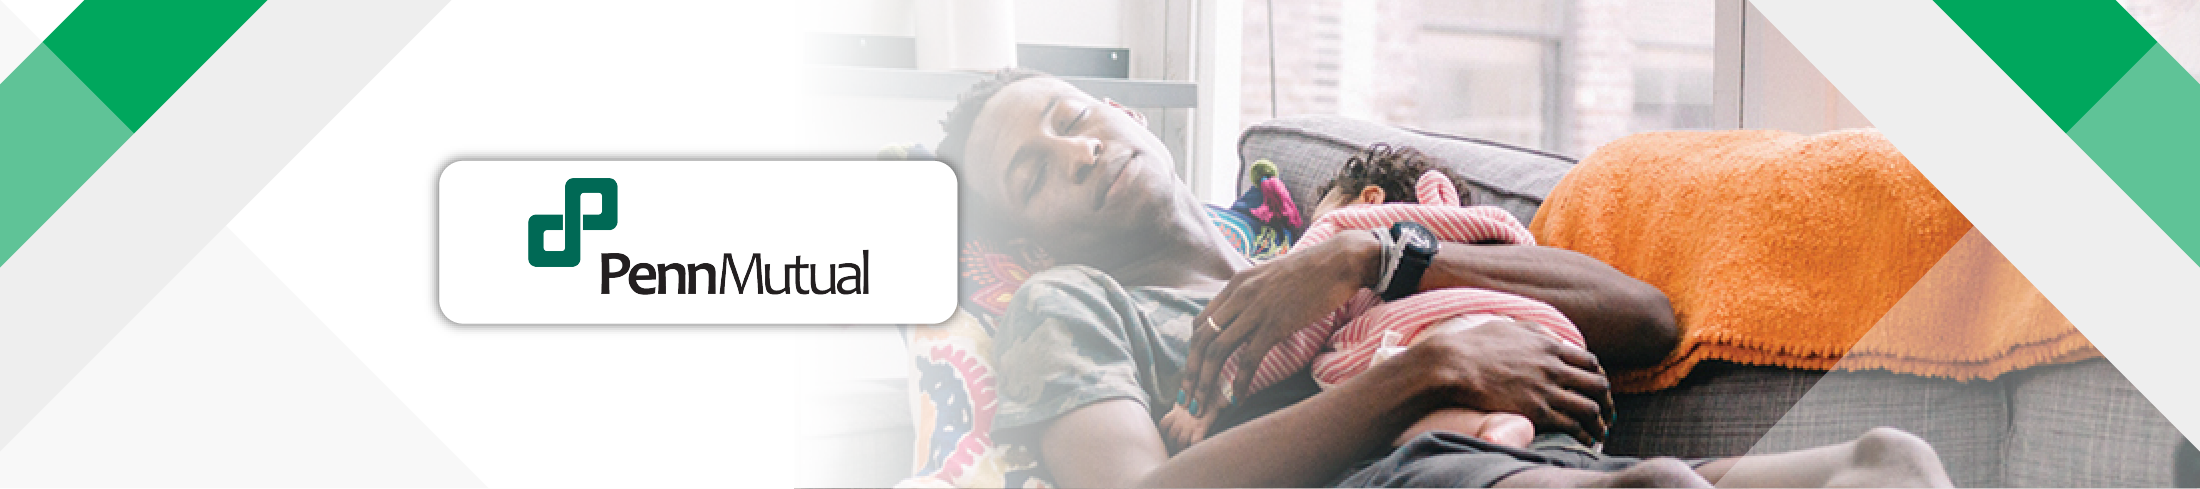 Father napping on couch with newborn child protected by Penn Mutual